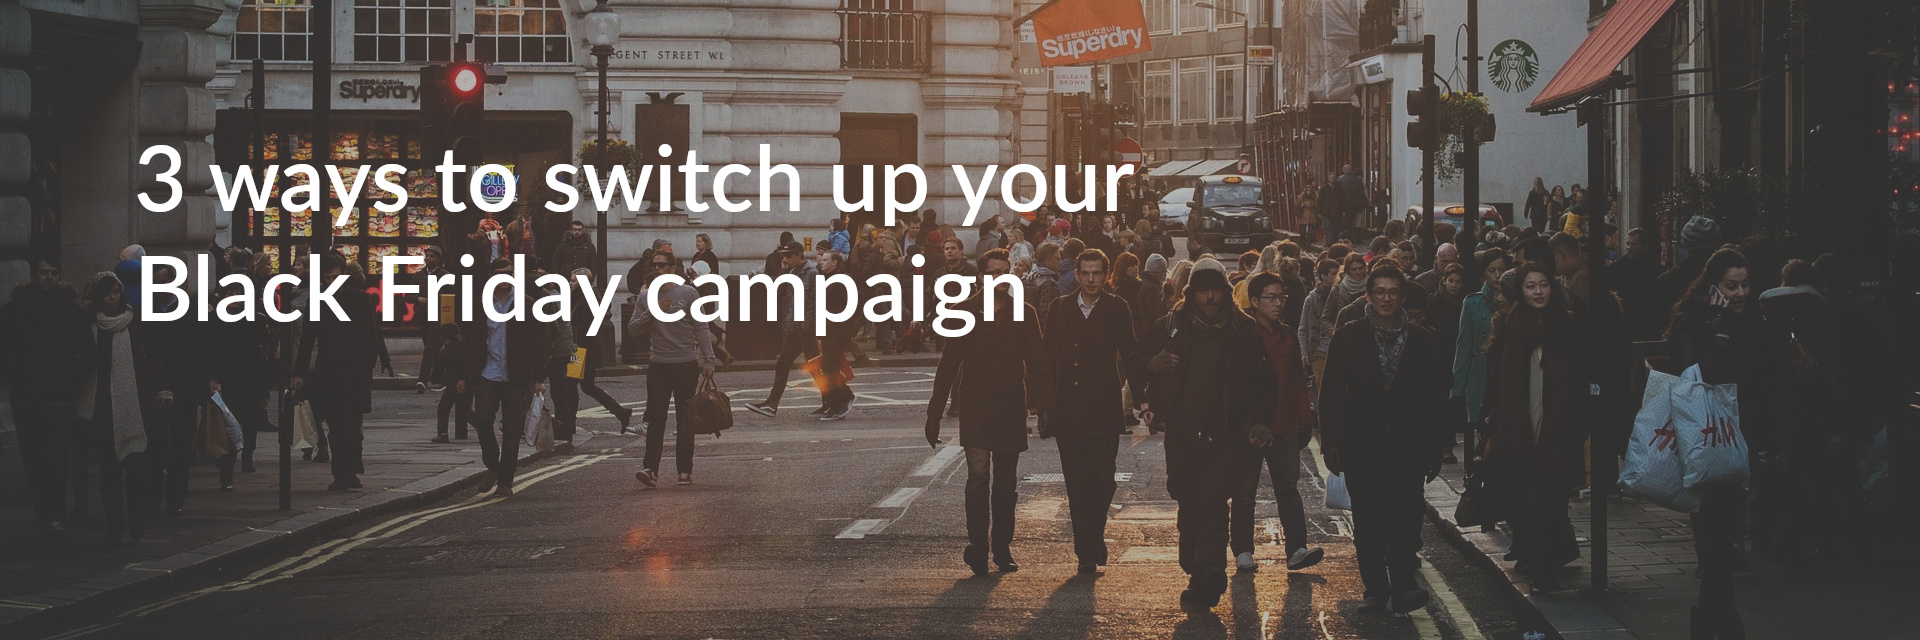 3 ways to switch up your Black Friday campaign